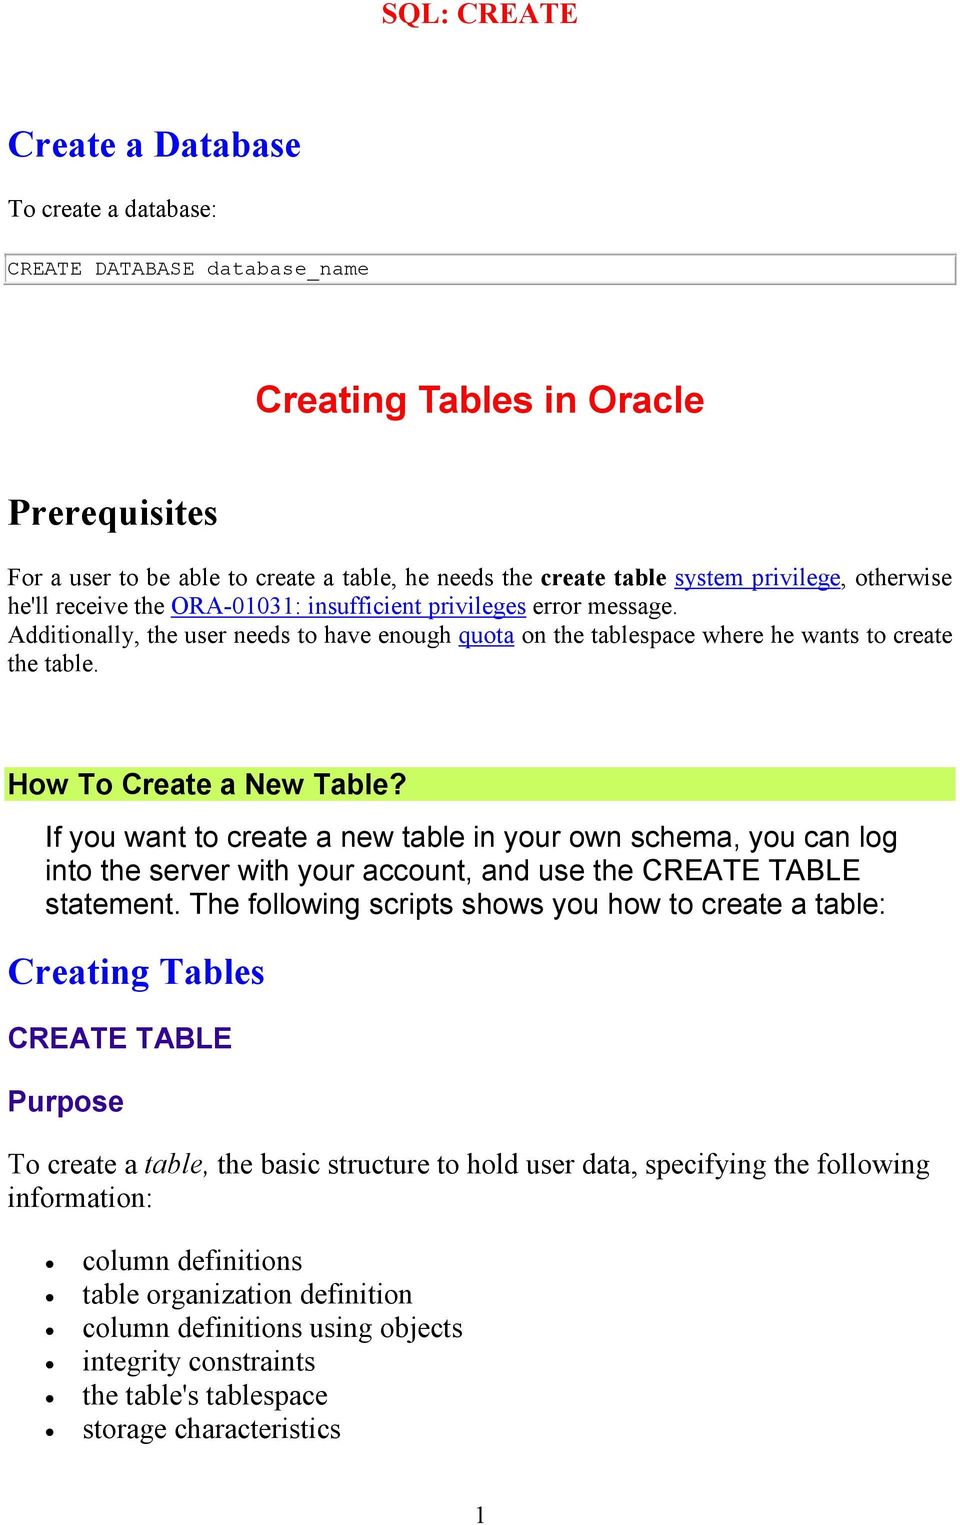 How To Create a New Table? If you want to create a new table in your own schema, you can log into the server with your account, and use the CREATE TABLE statement.